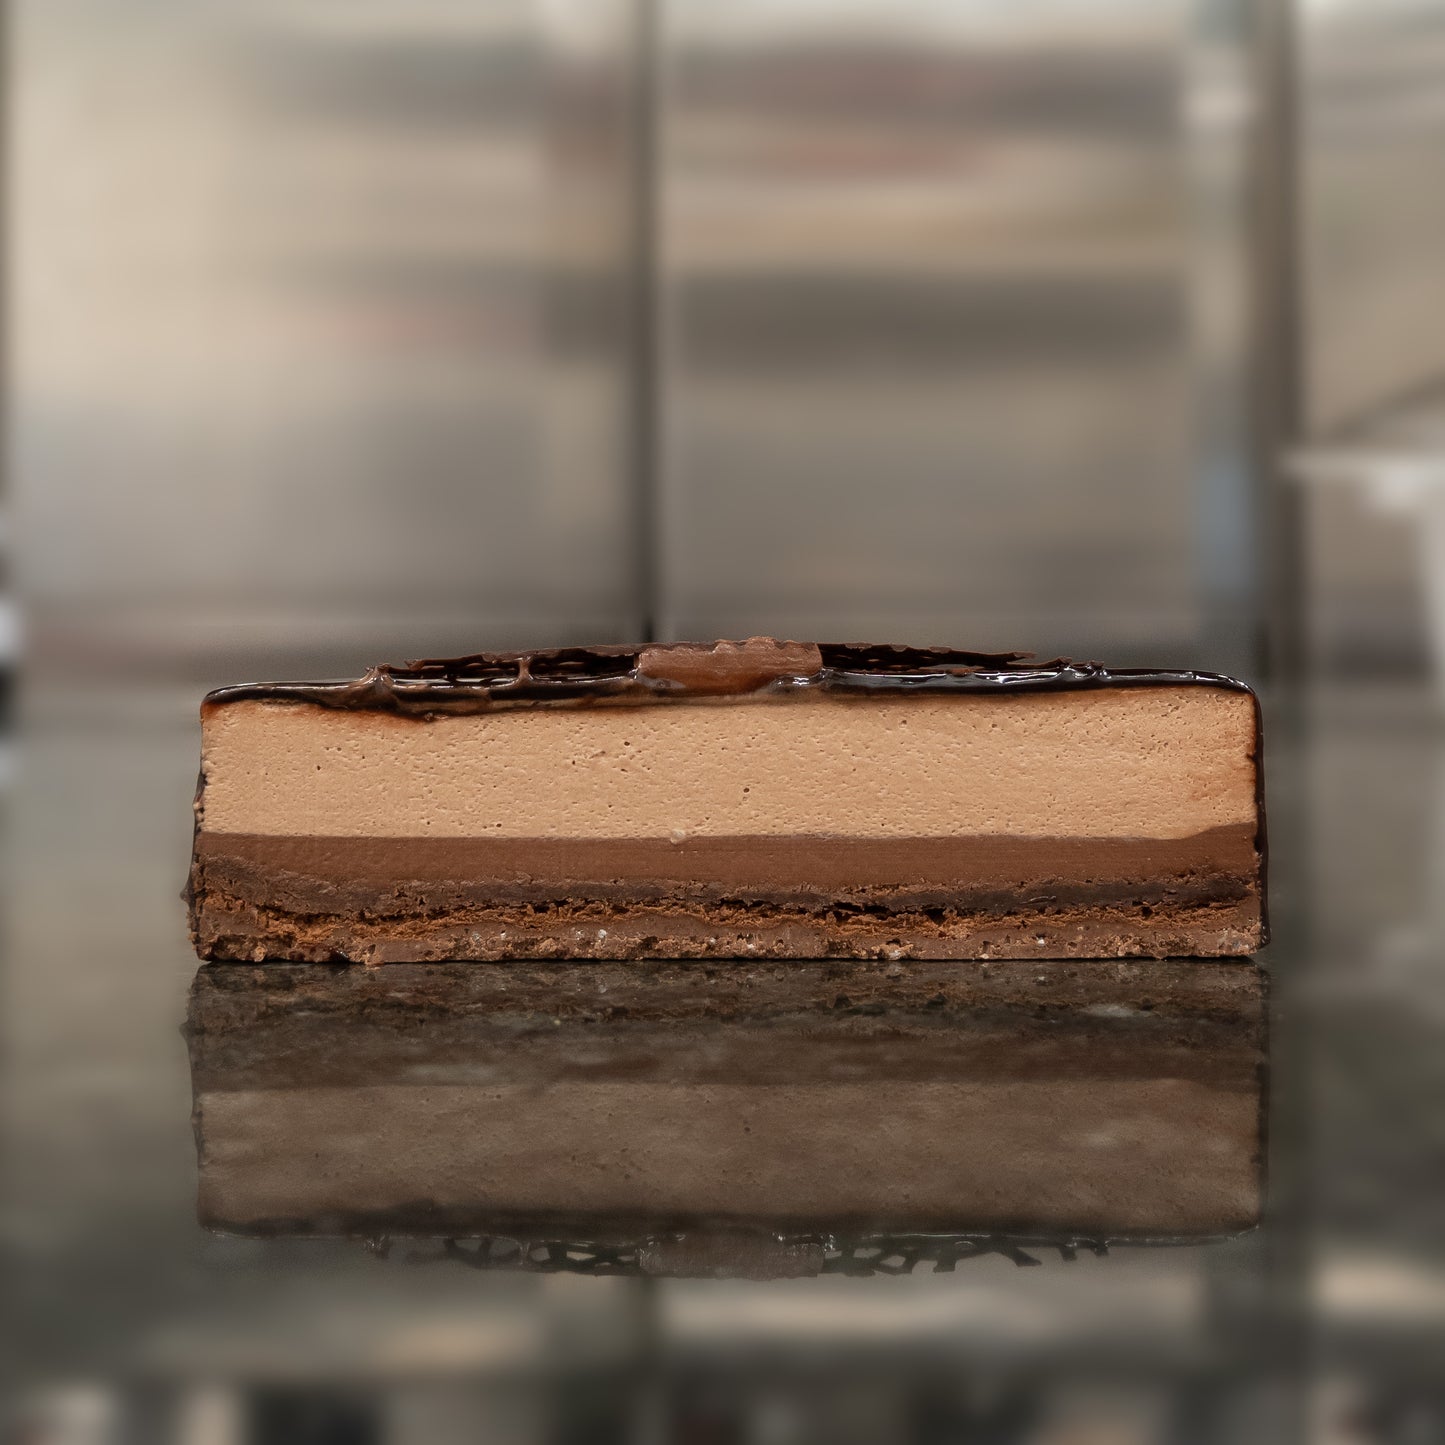 Cross section of the absolute chocolate cake. Layers of mousse, crémeux, biscuit and a crunchy base.